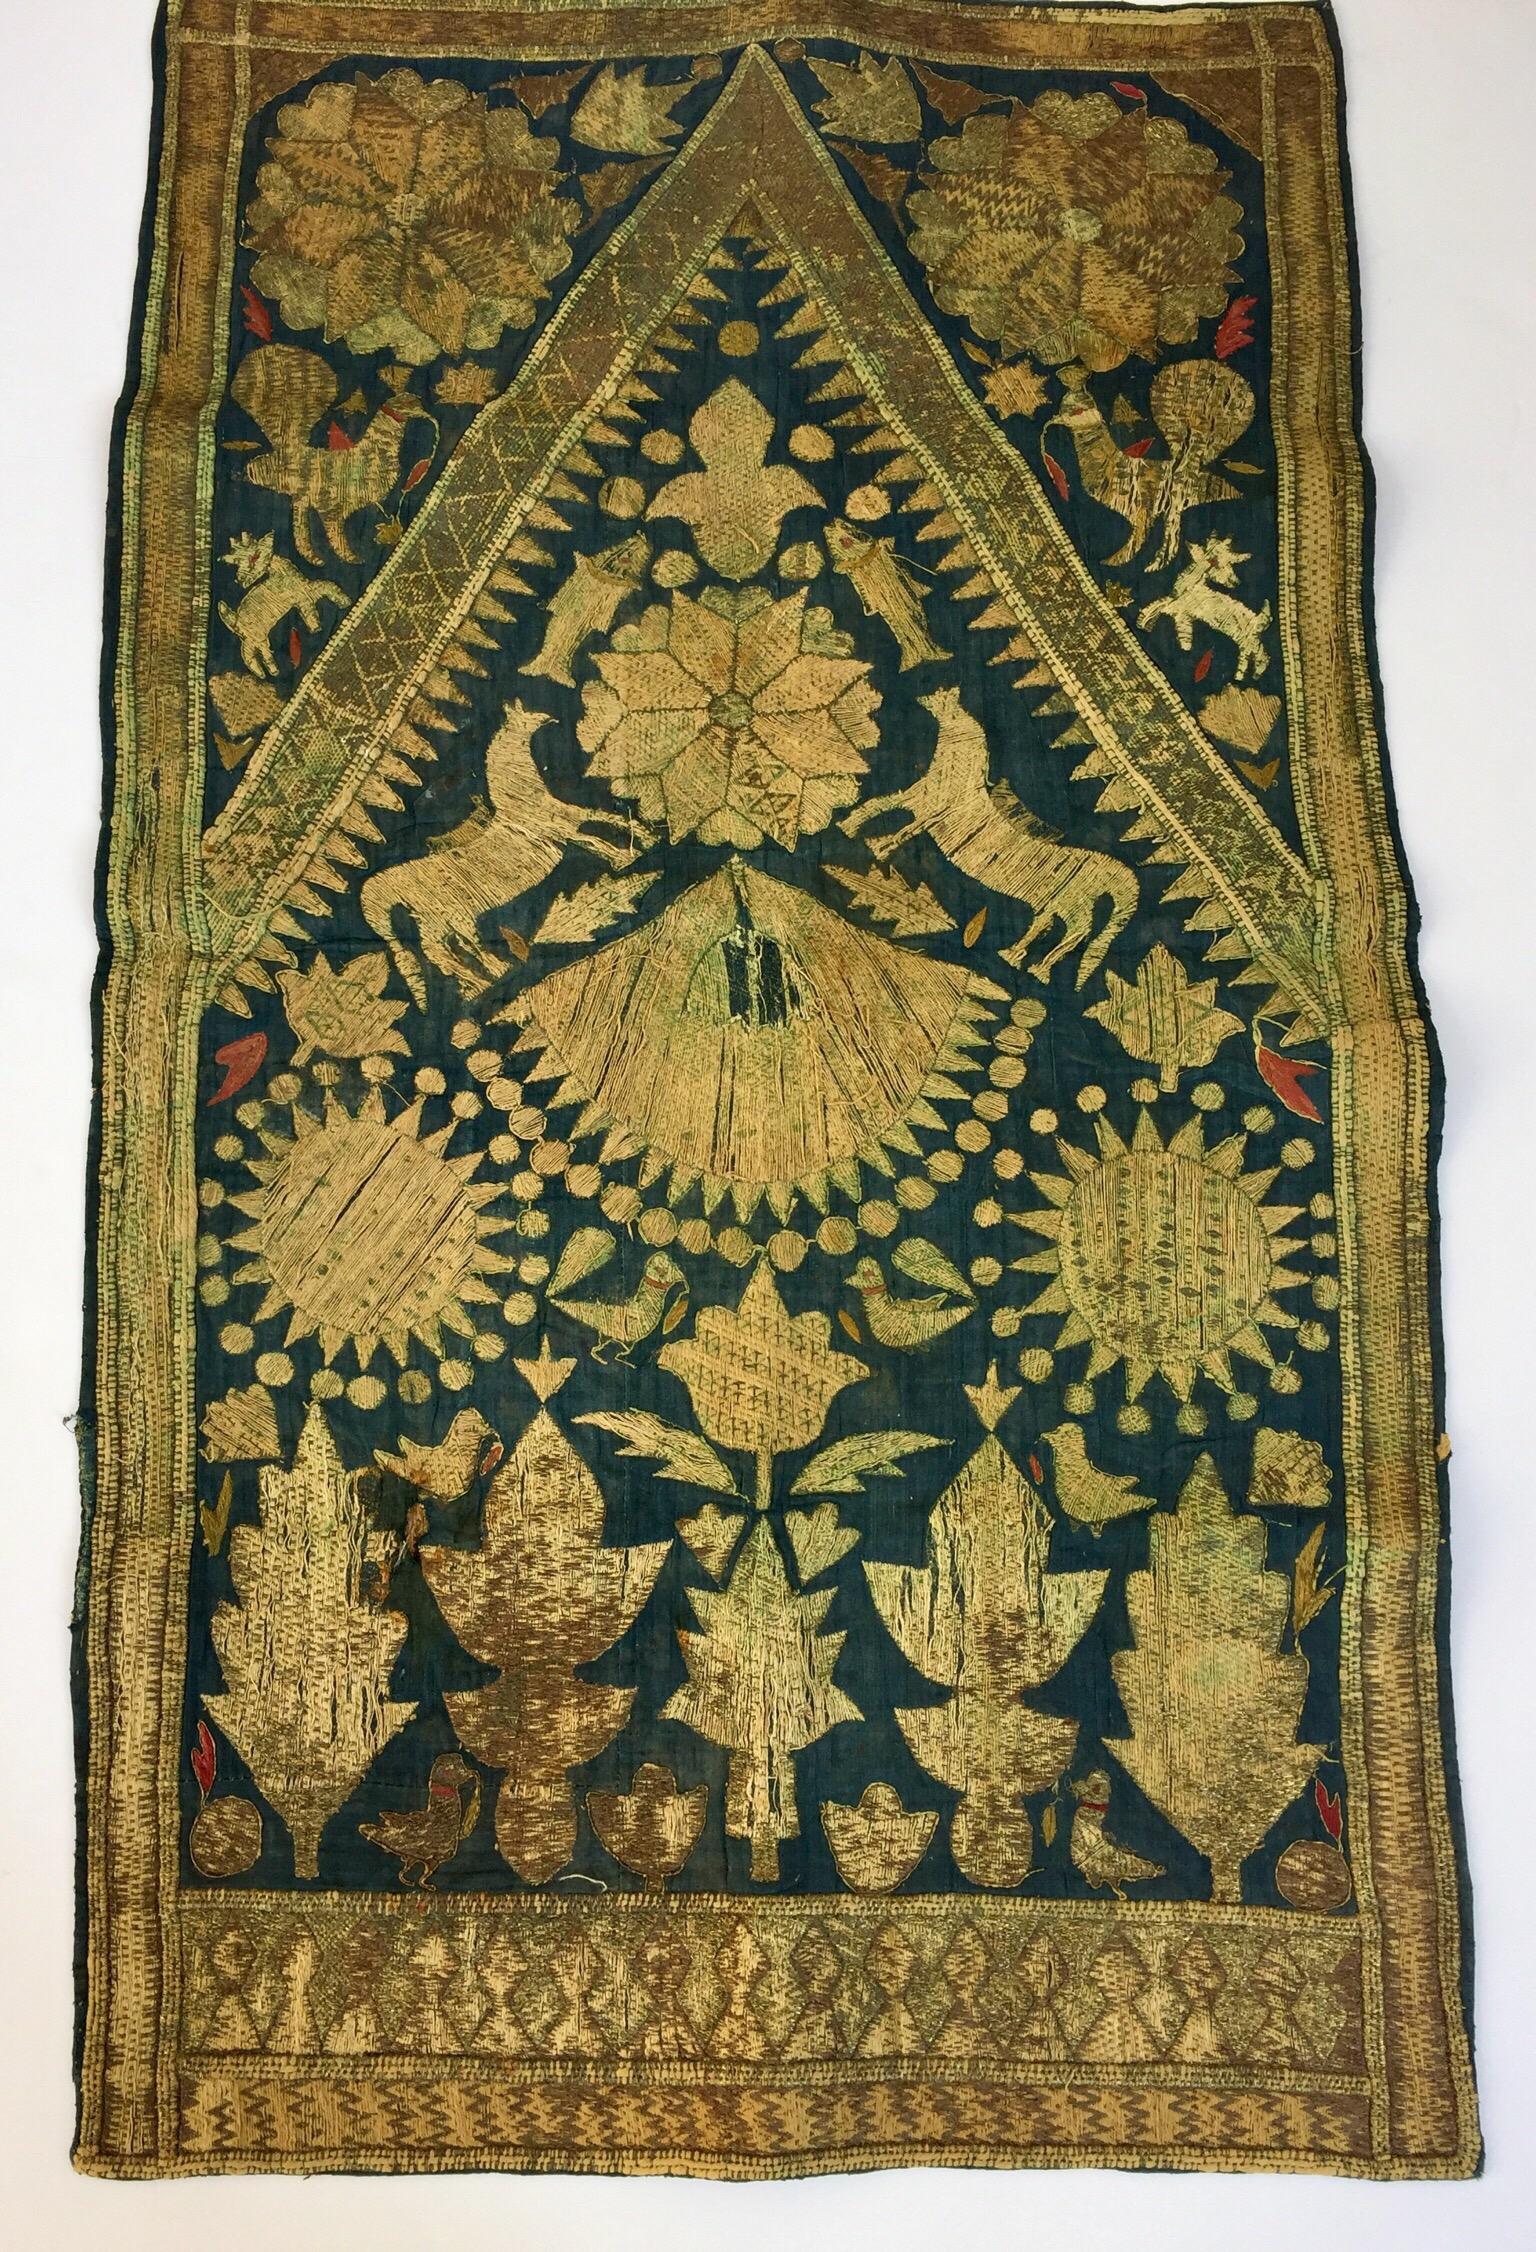 Early 19th century antique Islamic Ottoman Empire metallic threads embroidered silk textile.
Antique Oriental Byzantine textile depicting embroidered flowers depicting branches filled-in with silk floss threads creating an intricate embroidered